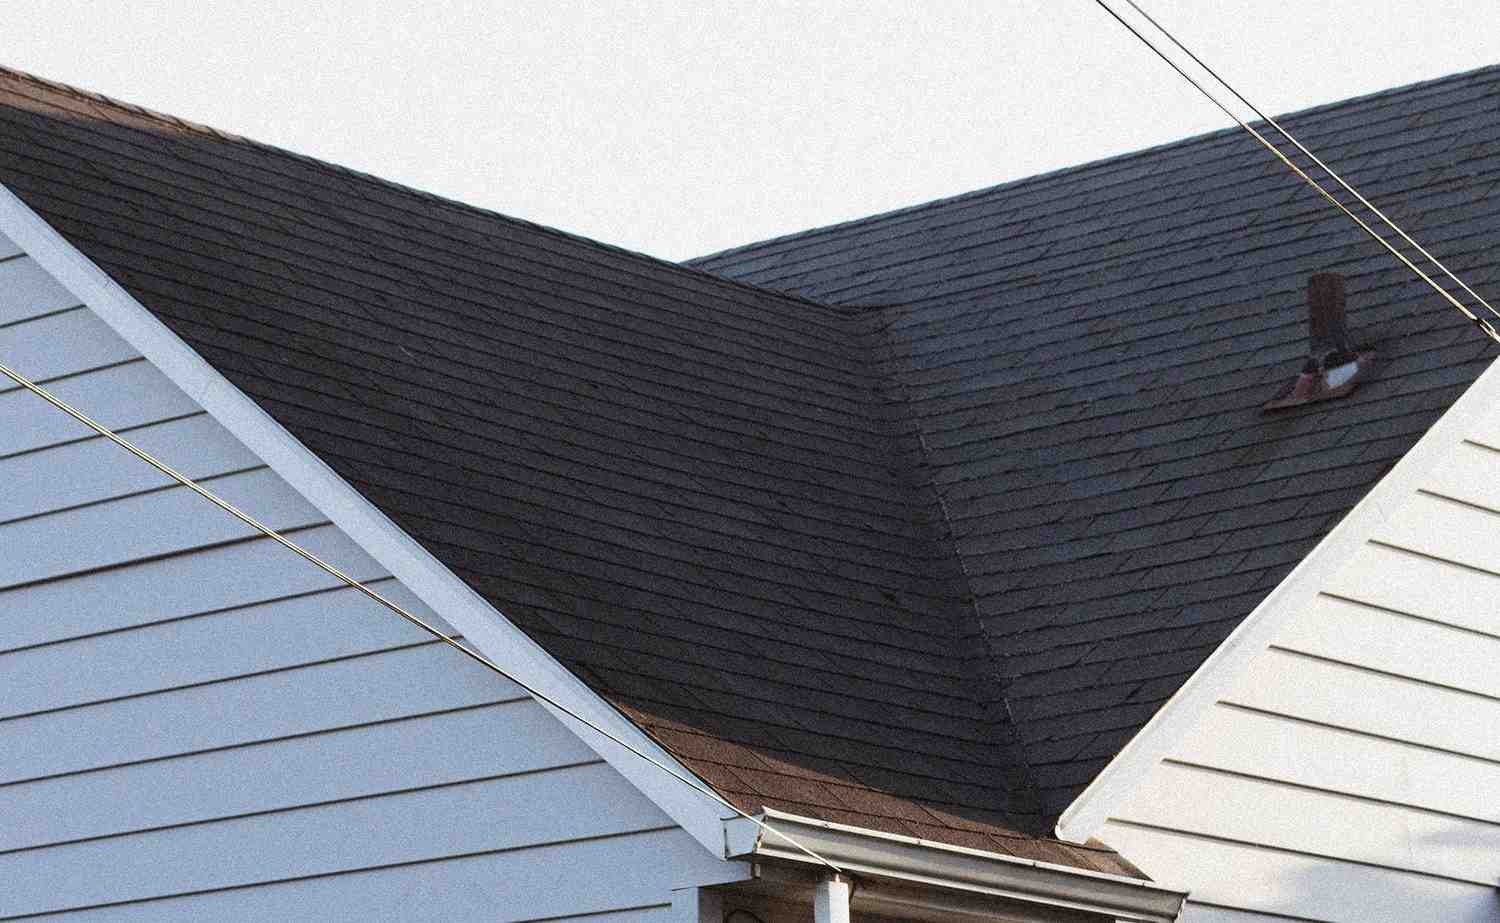 How much should you pay a roofer?